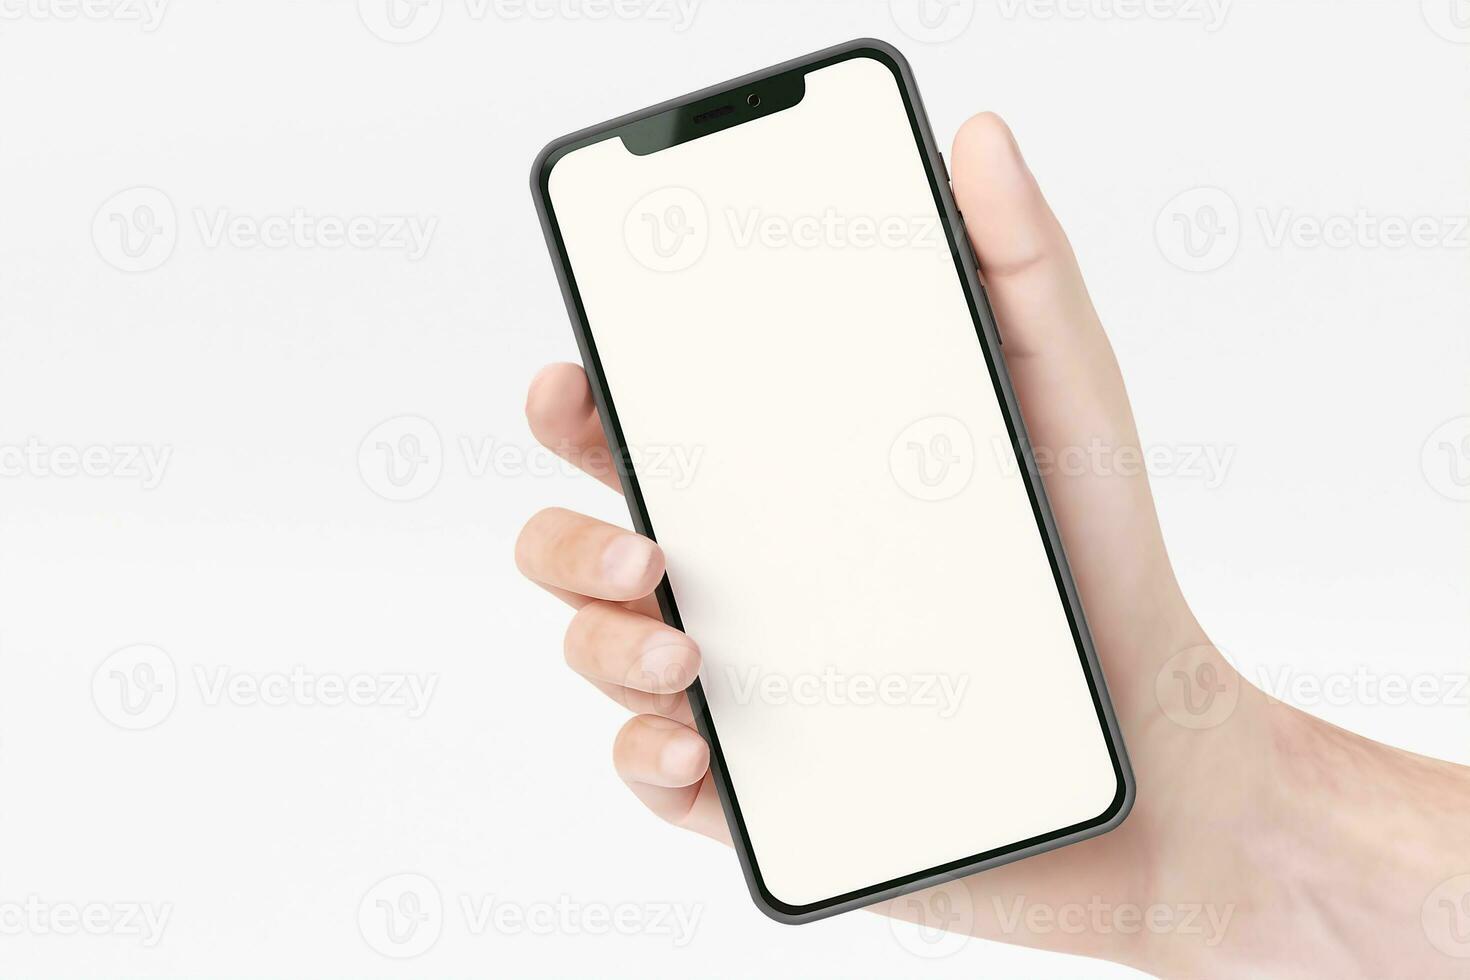 Smartphone mockup in a hand holding it photo